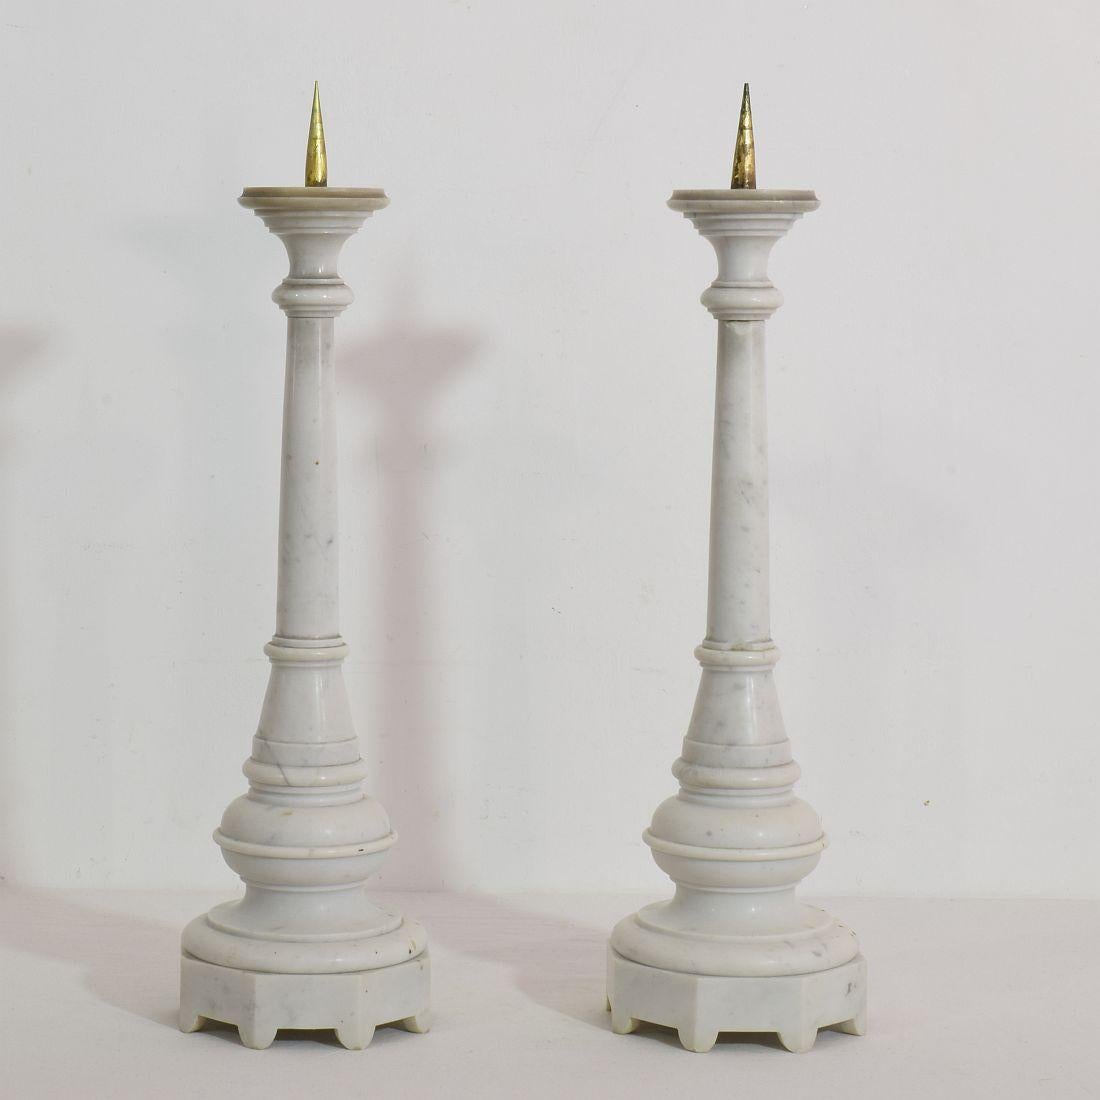 Great and rare pair of marble candleholders with fire gilt bronze peaks
France, circa 1850
Weathered and small losses.